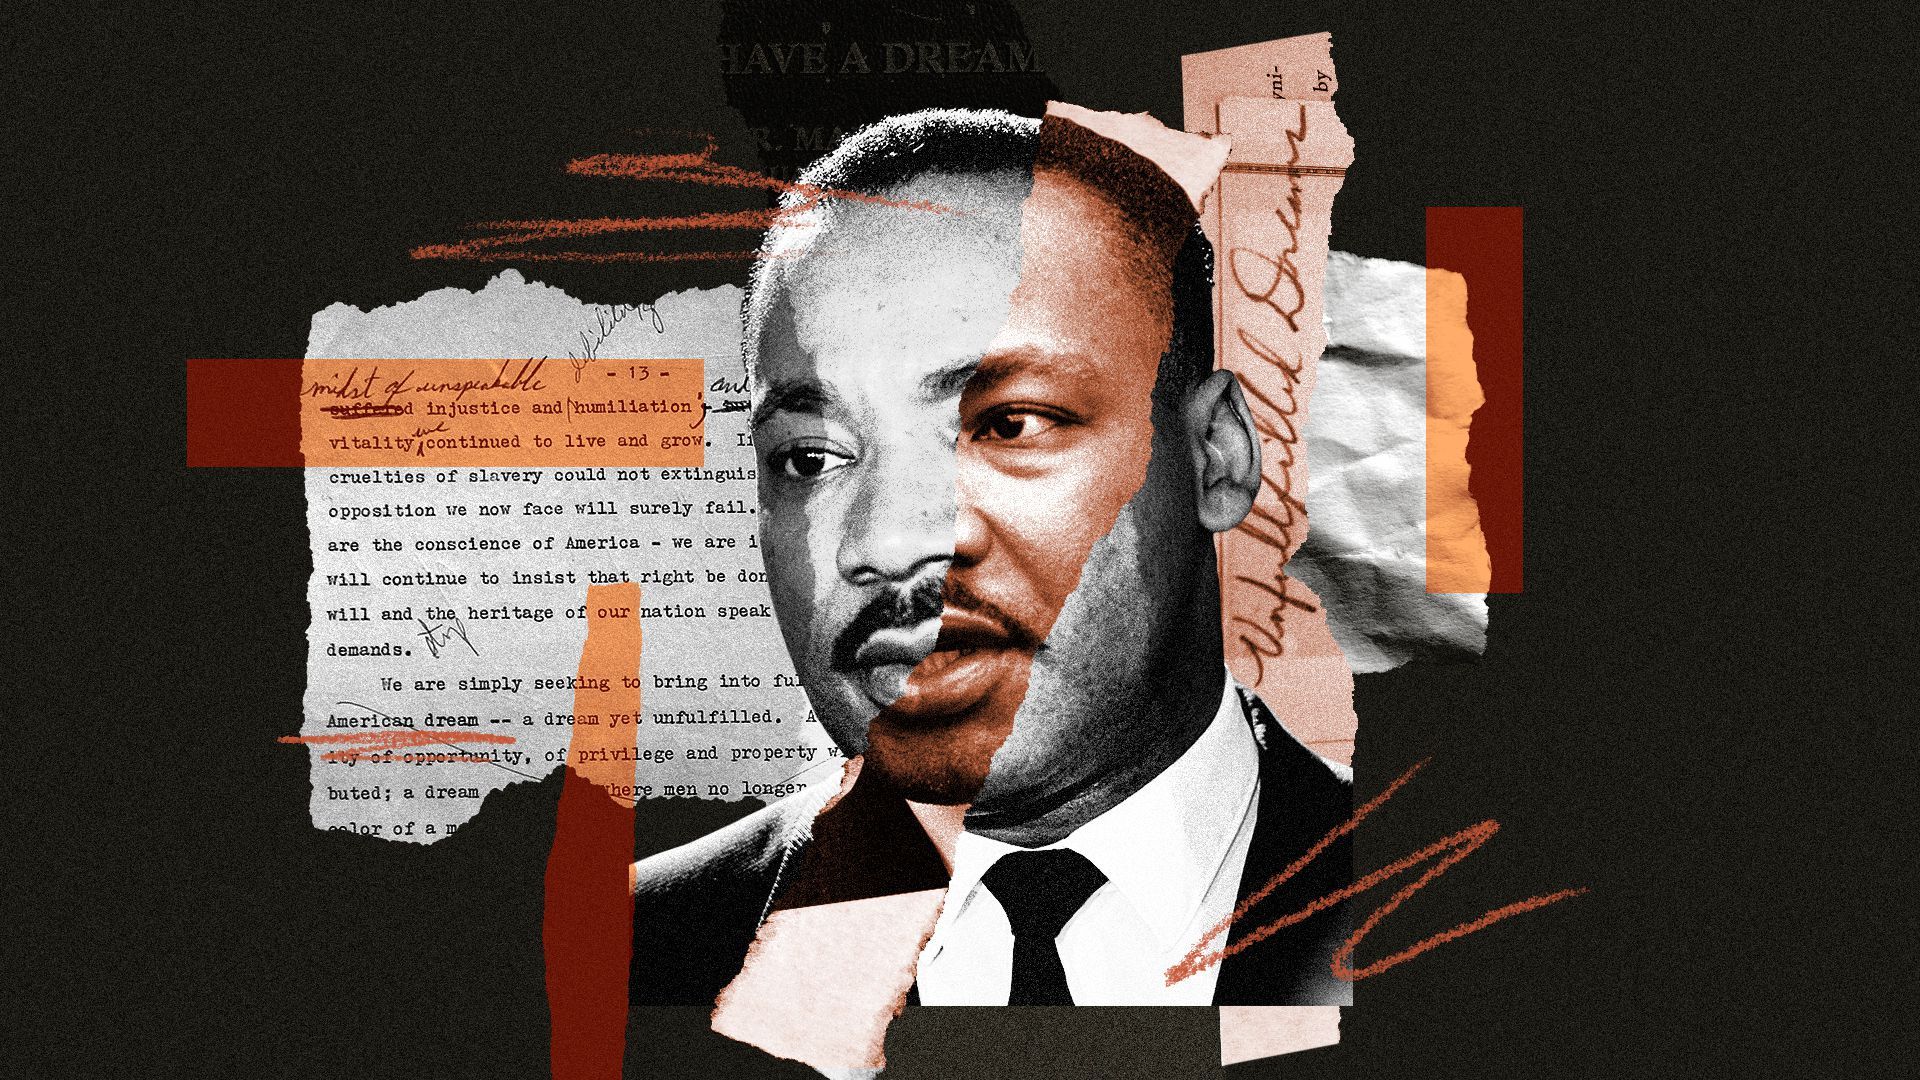 Photo illustration of Dr. Martin Luther King Jr. in a collage of torn paper and abstract shapes containing his "I Have a Dream" speech.